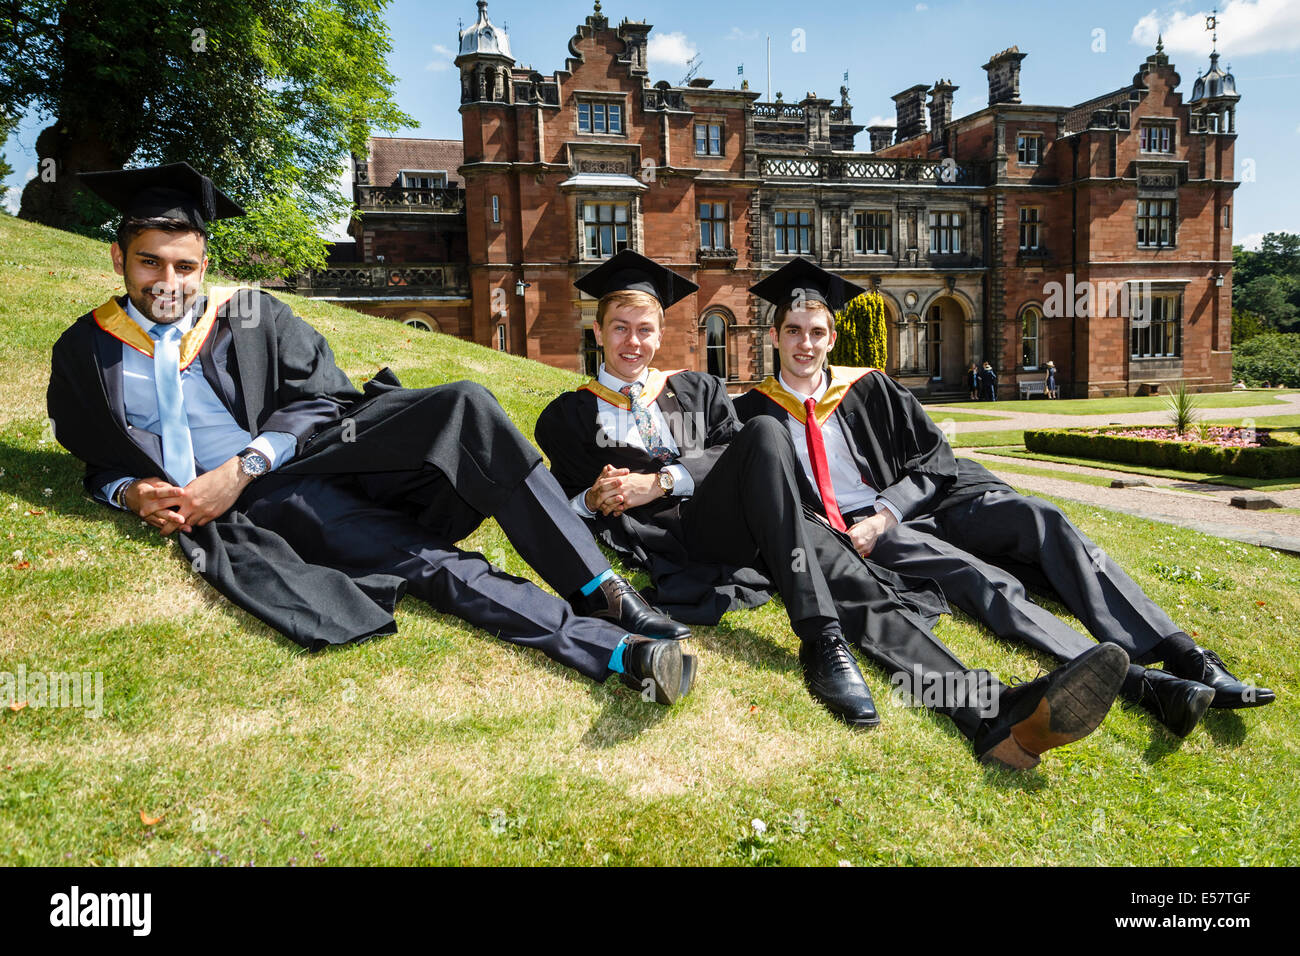 University students pose in traditional mortar boards and gowns on graduation day, Keele University, UK Stock Photo